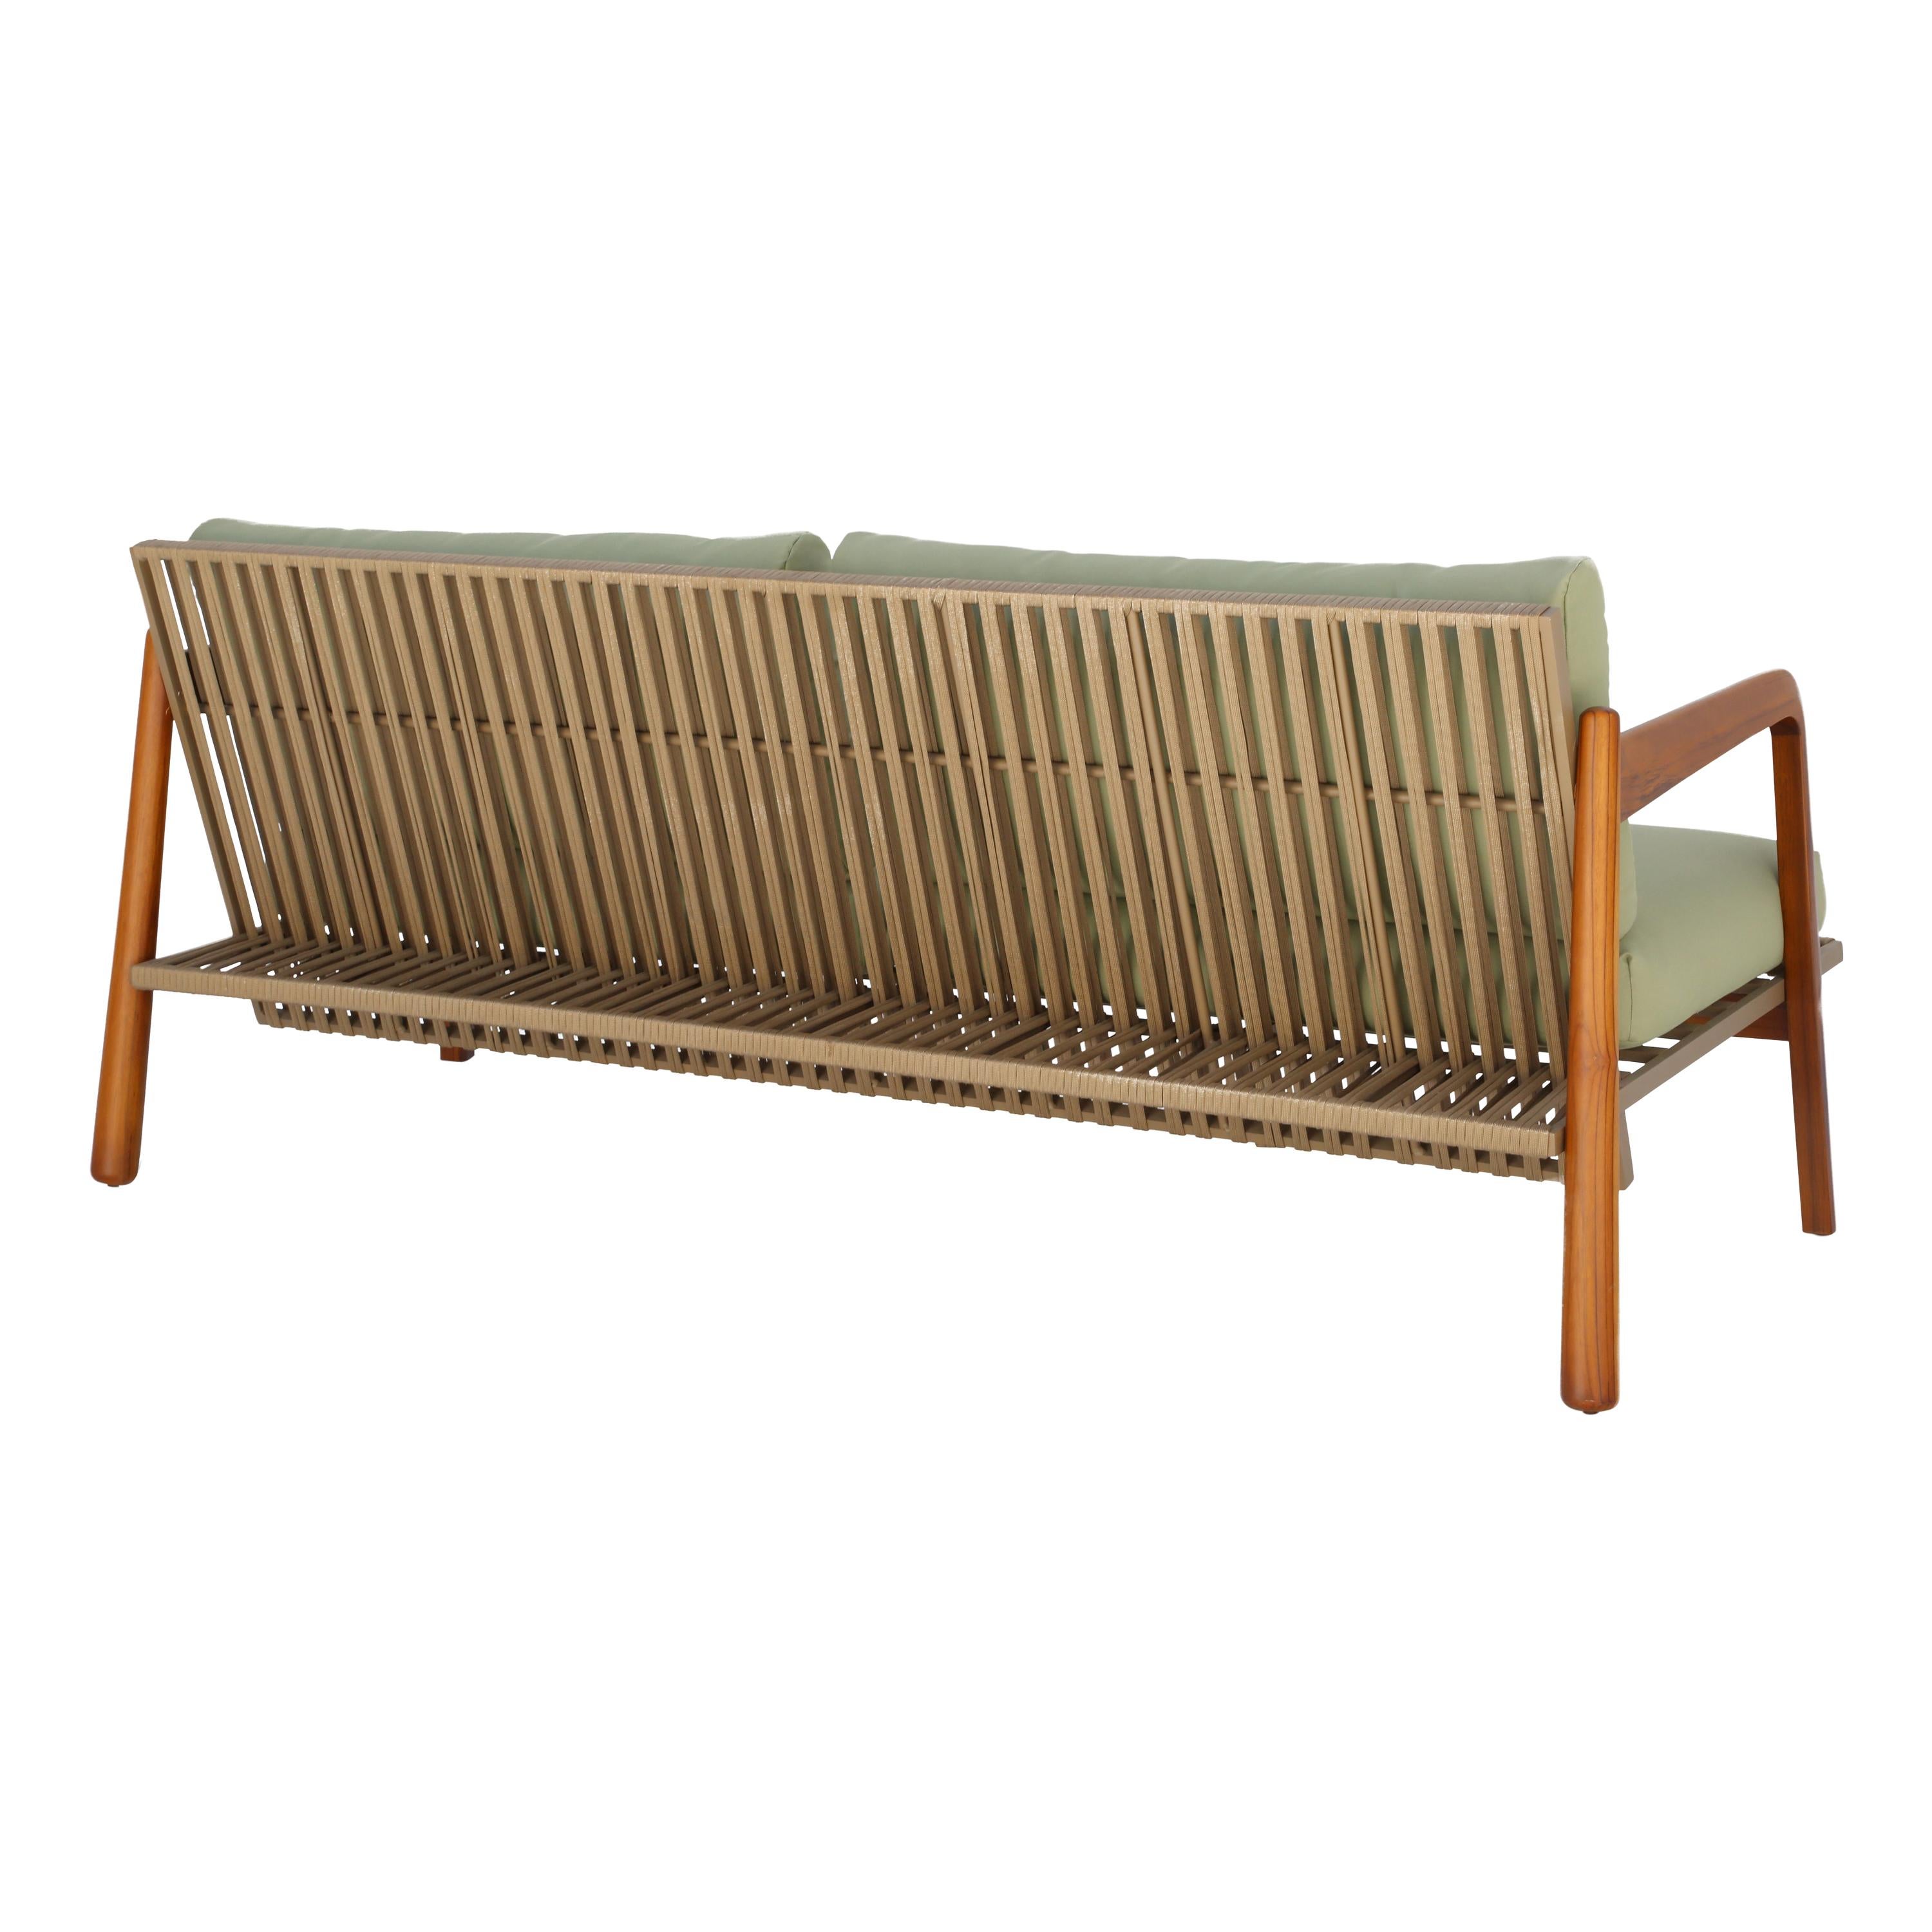 "Sancho" Outdoor Couch in Natural Teak Wood Aluminum and Naval Rope by Hand For Sale